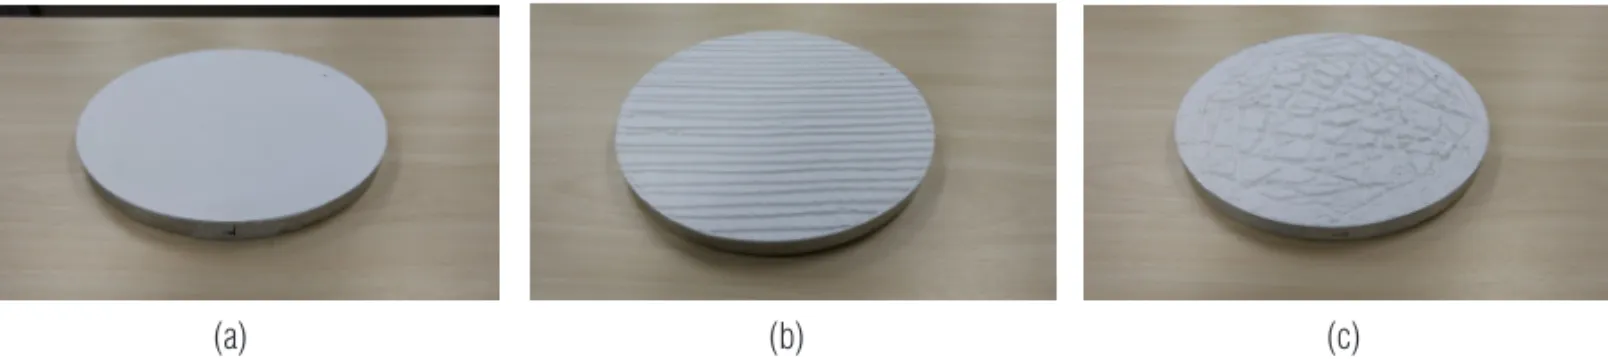 Figure 2 – Plaster surfaces used in the experiment. (a) S1, flat and silky; (b) S2, with nearly parallel grooves; (c) S3, with random grooves.